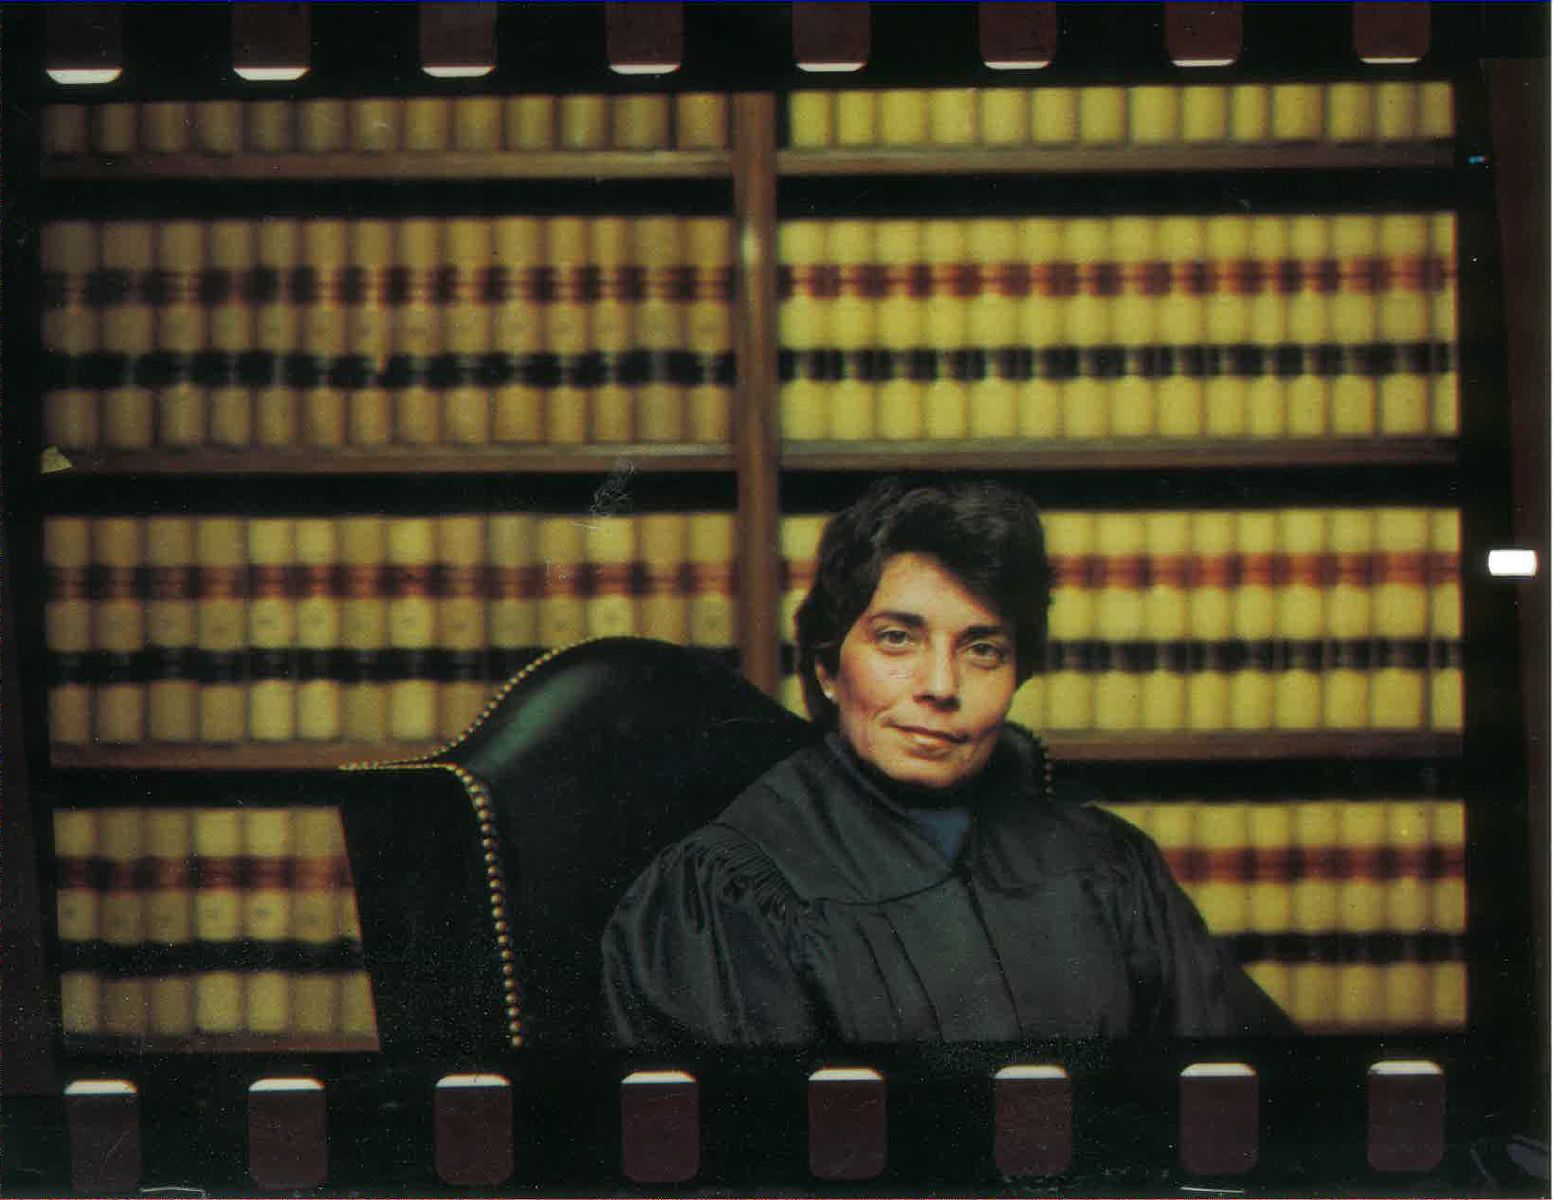 Justice Rothstein in her chambers.